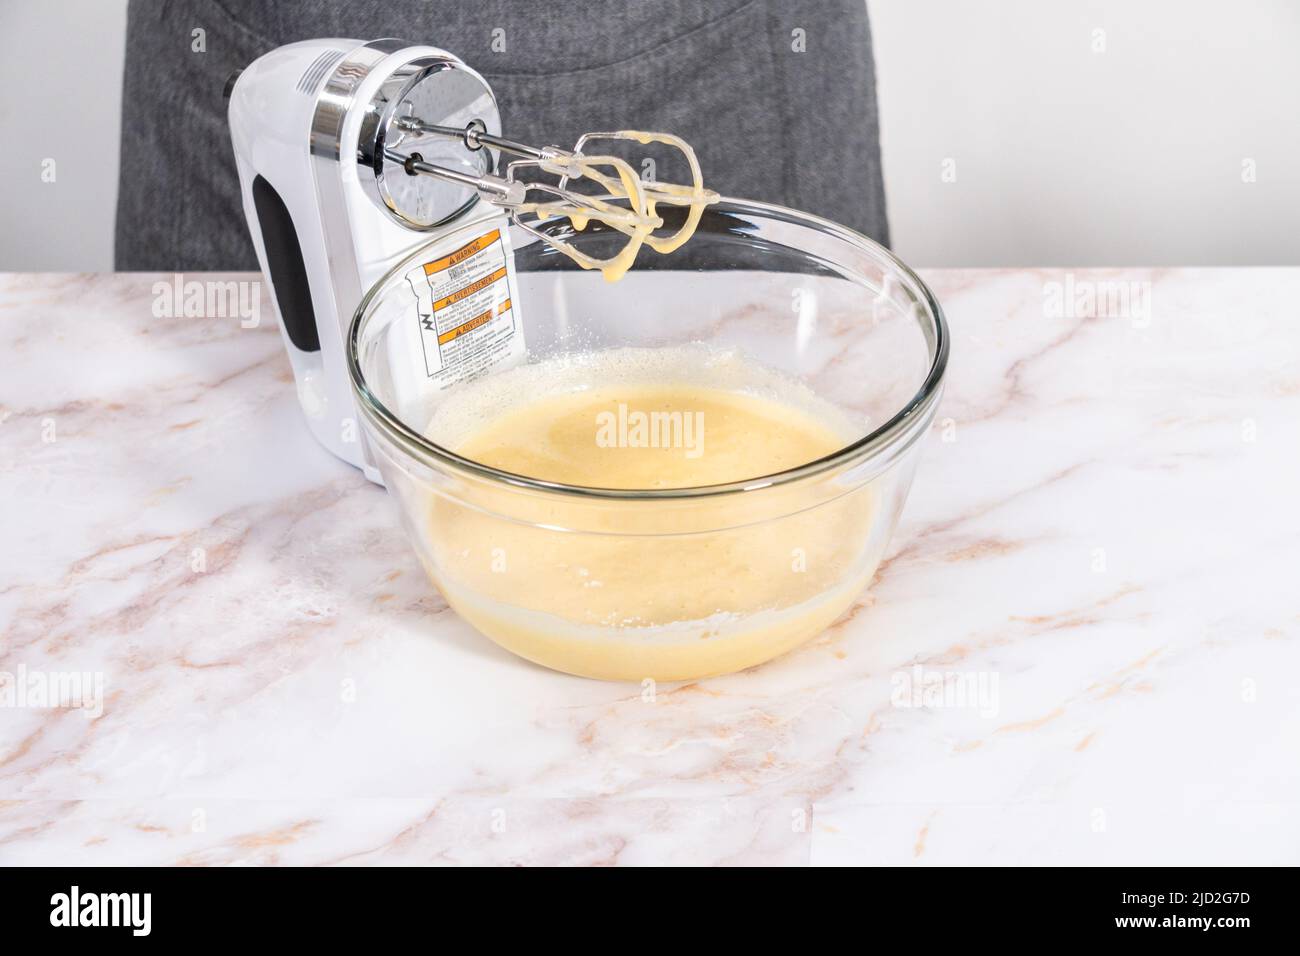 https://c8.alamy.com/comp/2JD2G7D/mixing-ingredients-in-a-large-glass-mixing-bowl-to-bake-apple-sharlotka-muffin-2JD2G7D.jpg